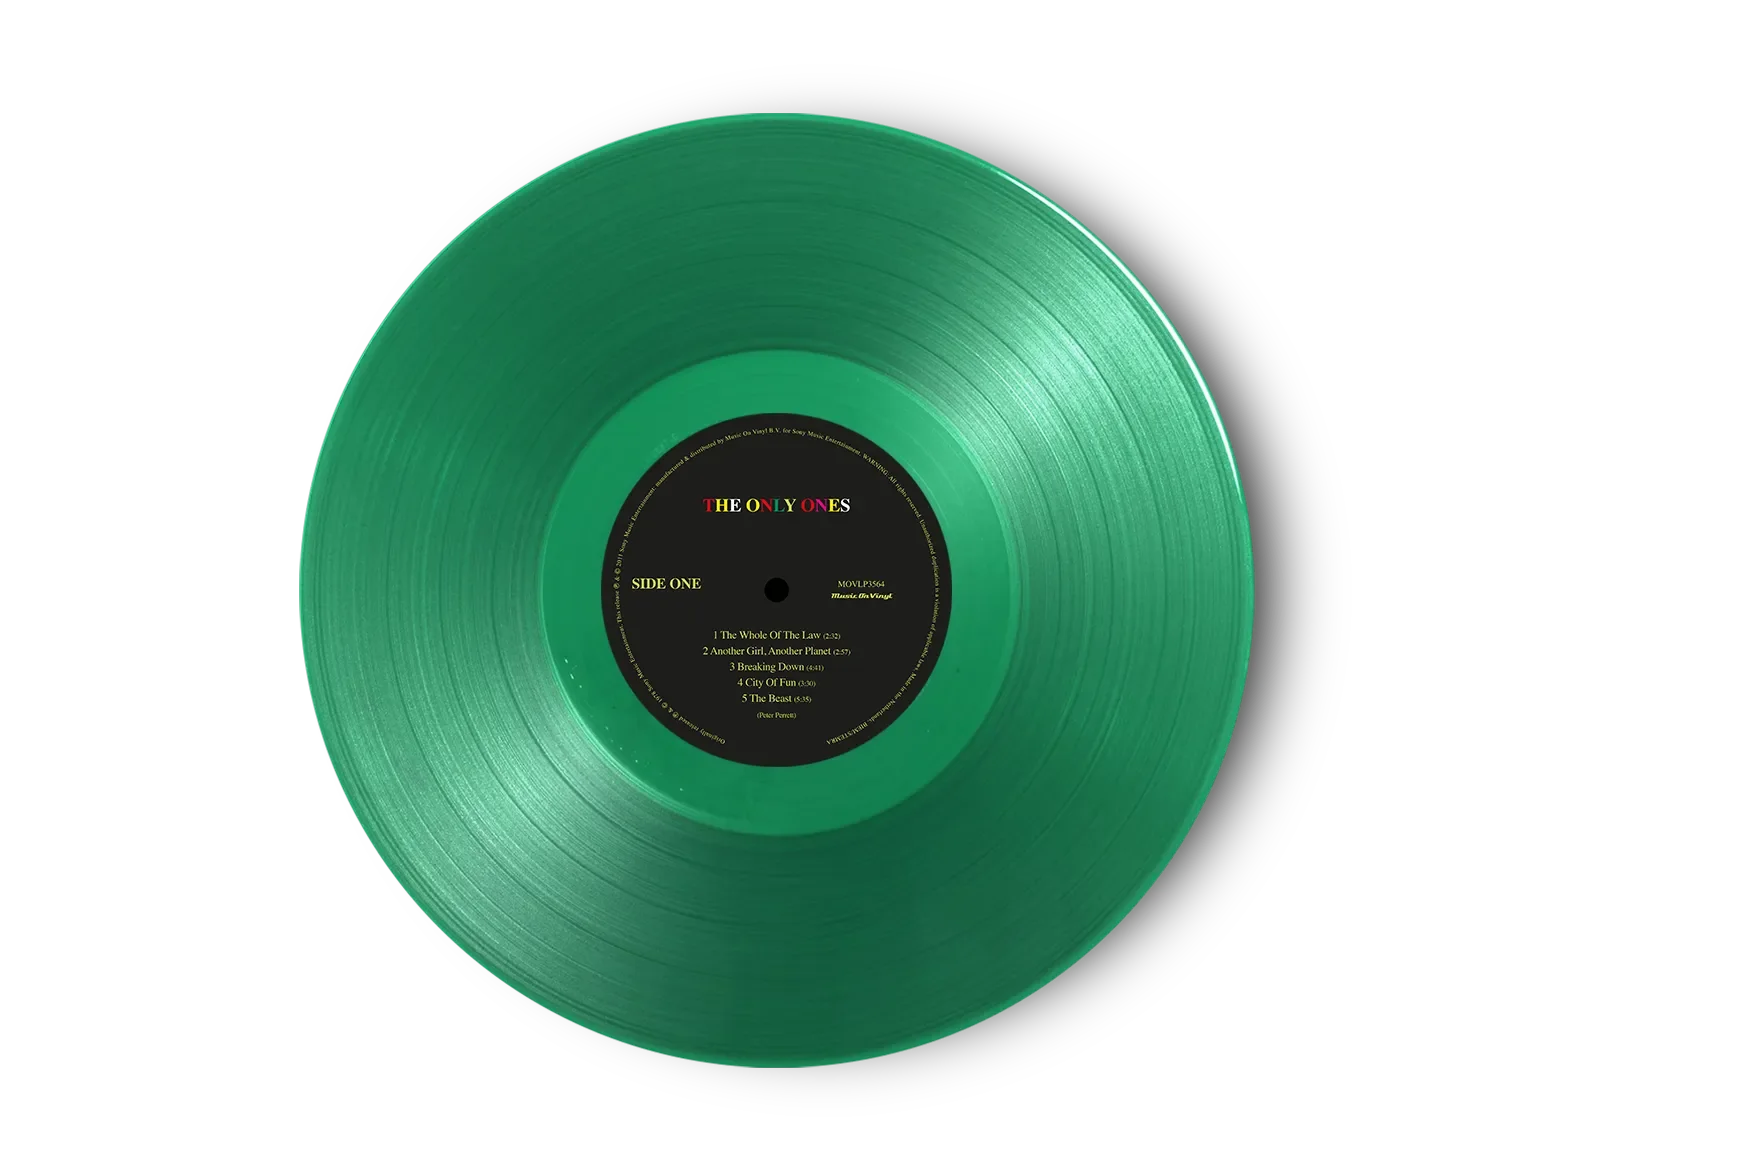 THE ONLY ONES - The Only Ones (2024 Reissue) - LP - 180g Translucent Green Vinyl [JUN 14]